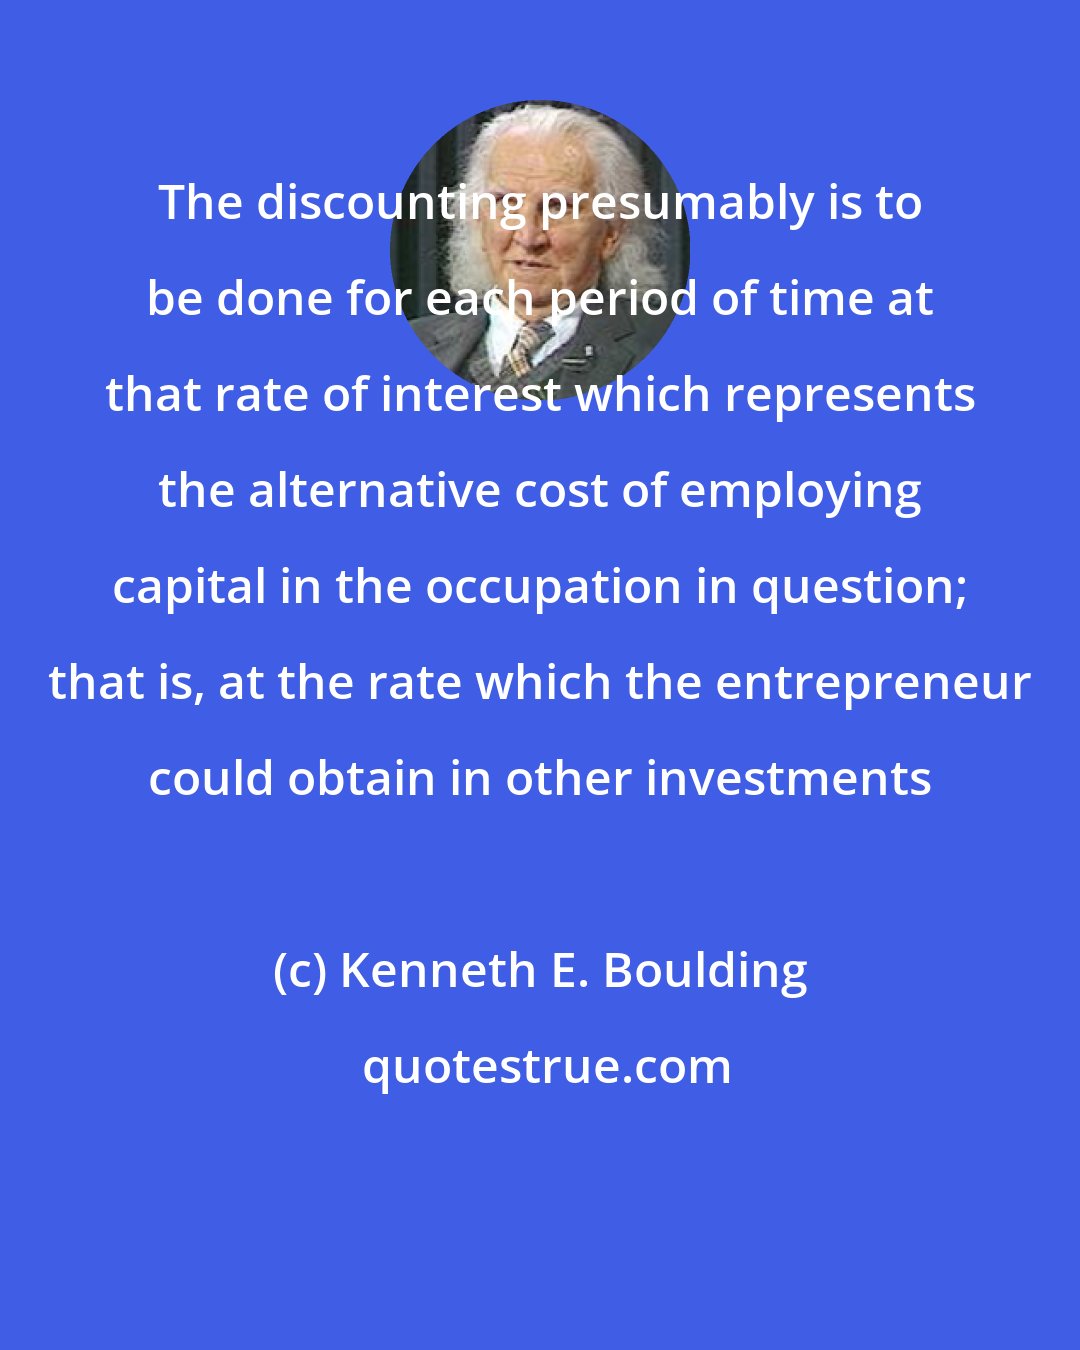 Kenneth E. Boulding: The discounting presumably is to be done for each period of time at that rate of interest which represents the alternative cost of employing capital in the occupation in question; that is, at the rate which the entrepreneur could obtain in other investments